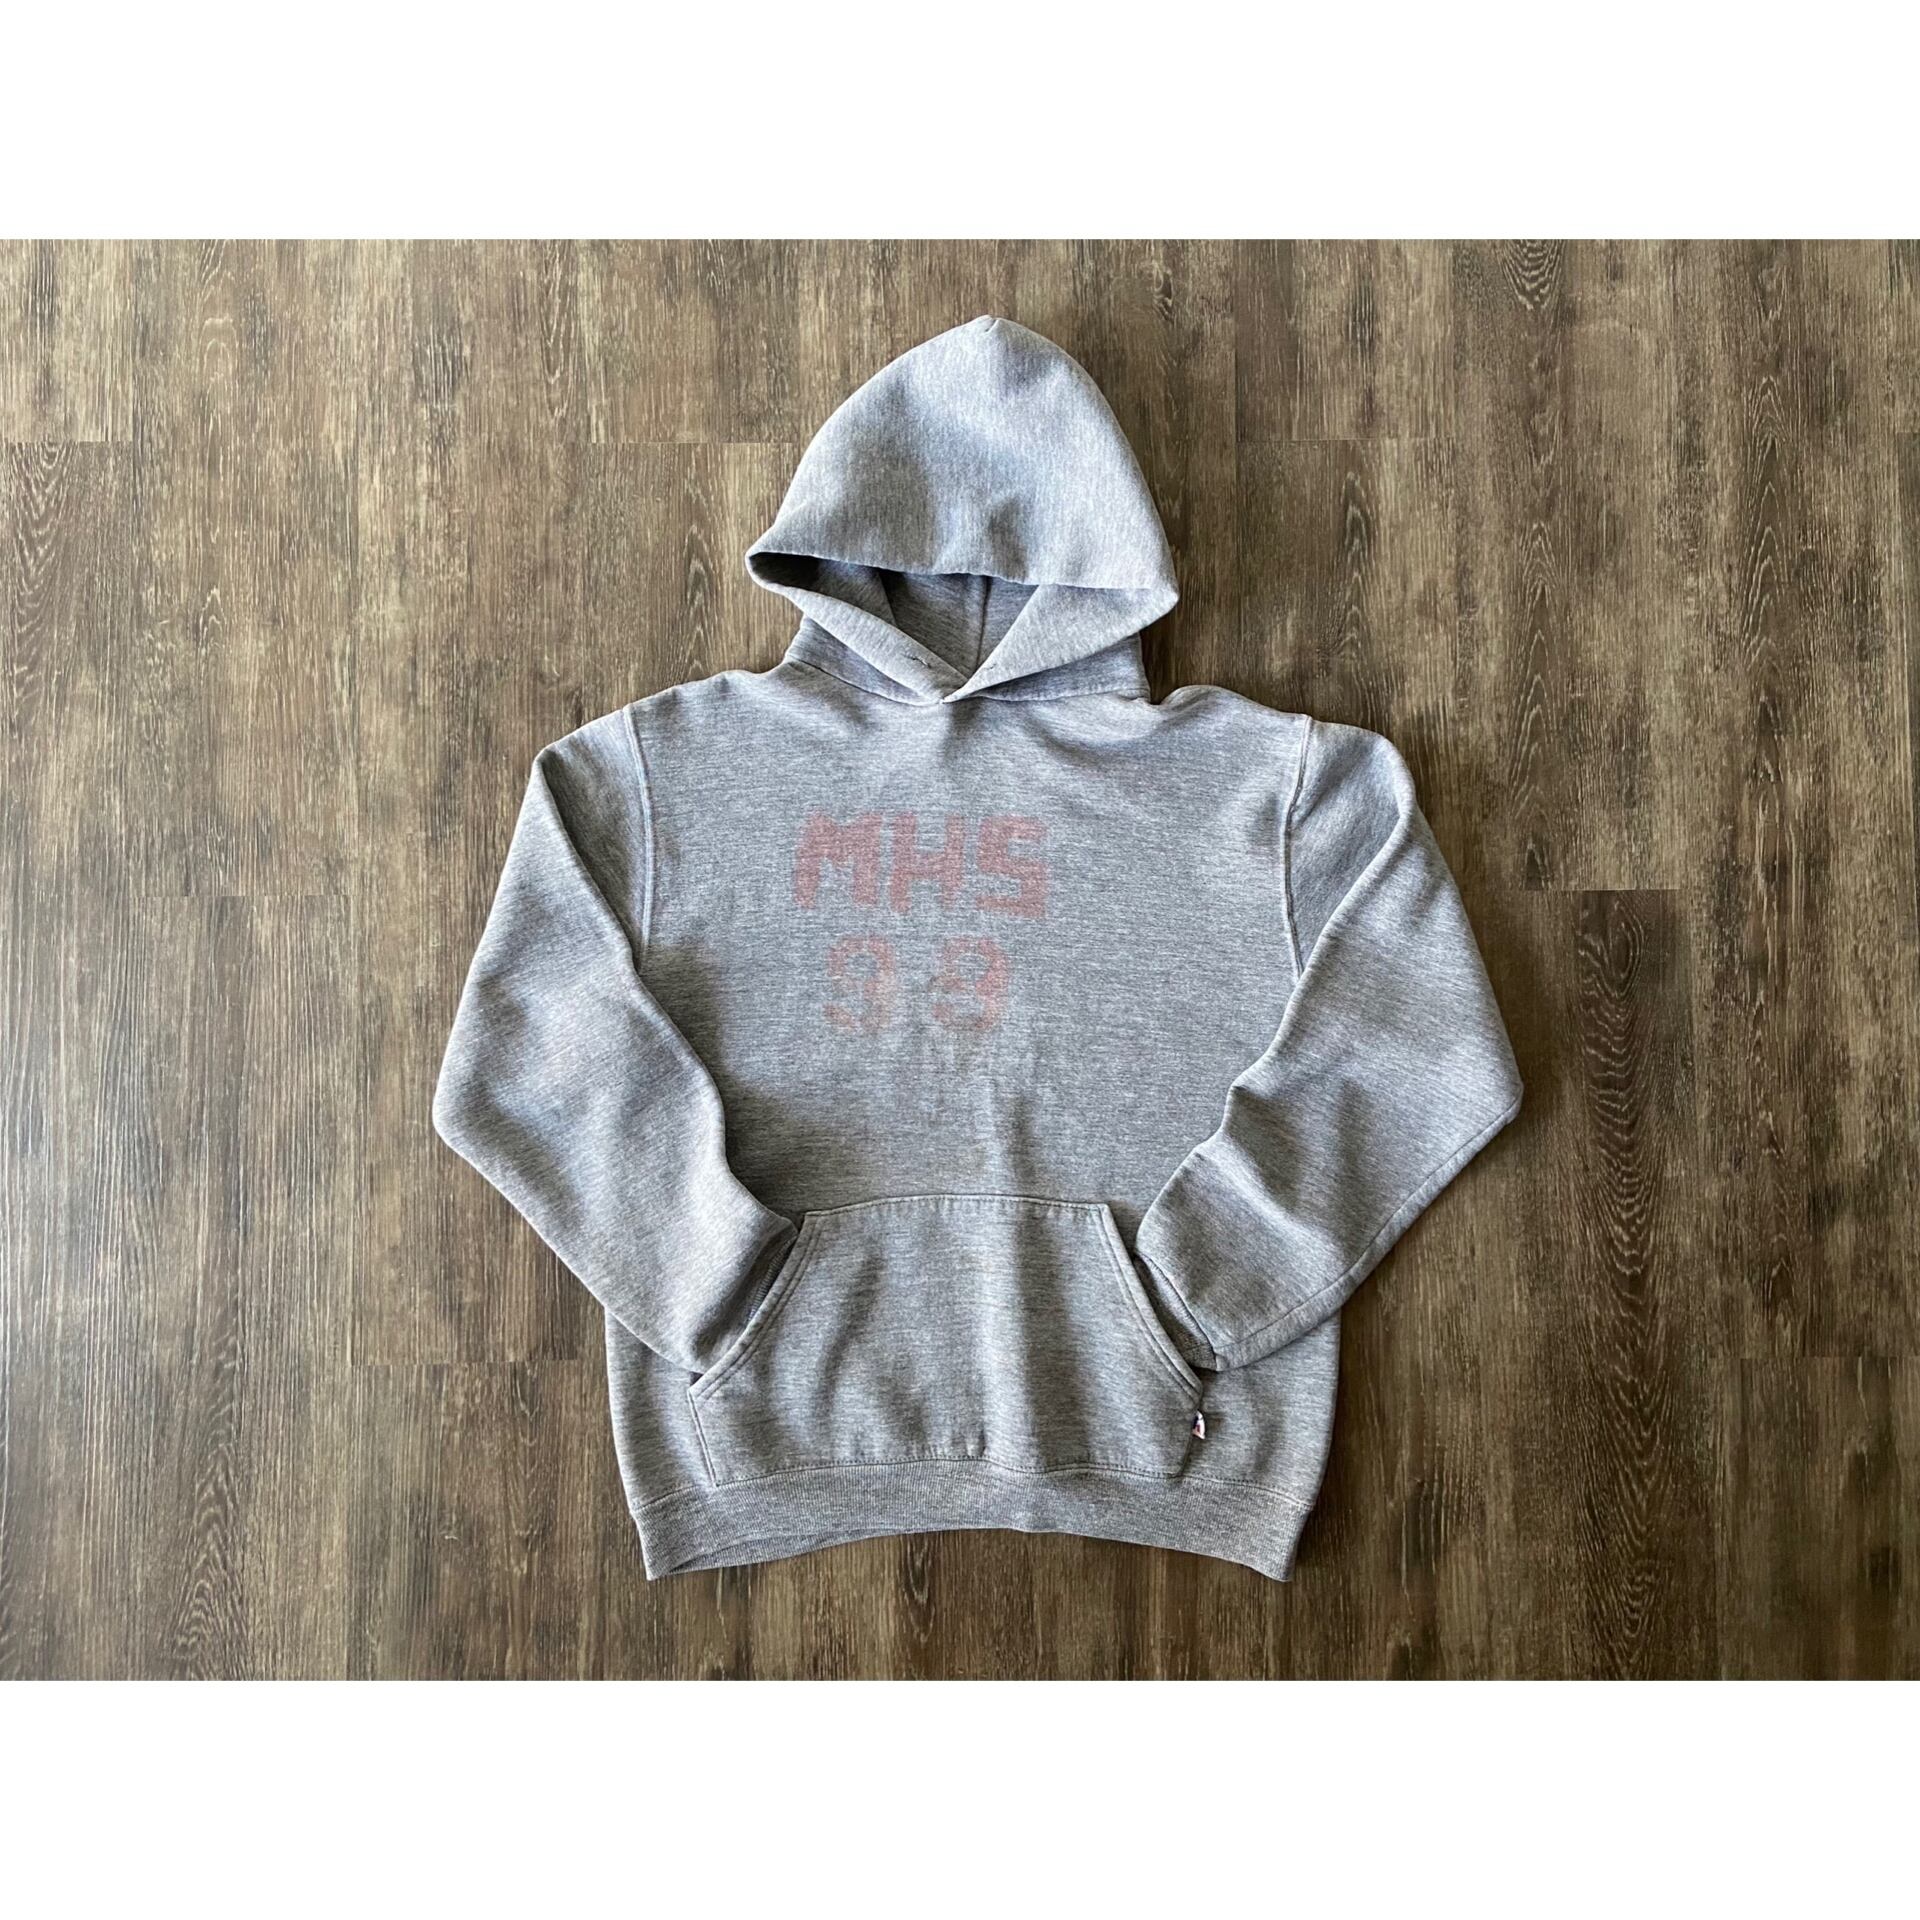 80s- “RUSSELL ATHLETIC” college sweat parka 染み込みプリント ...